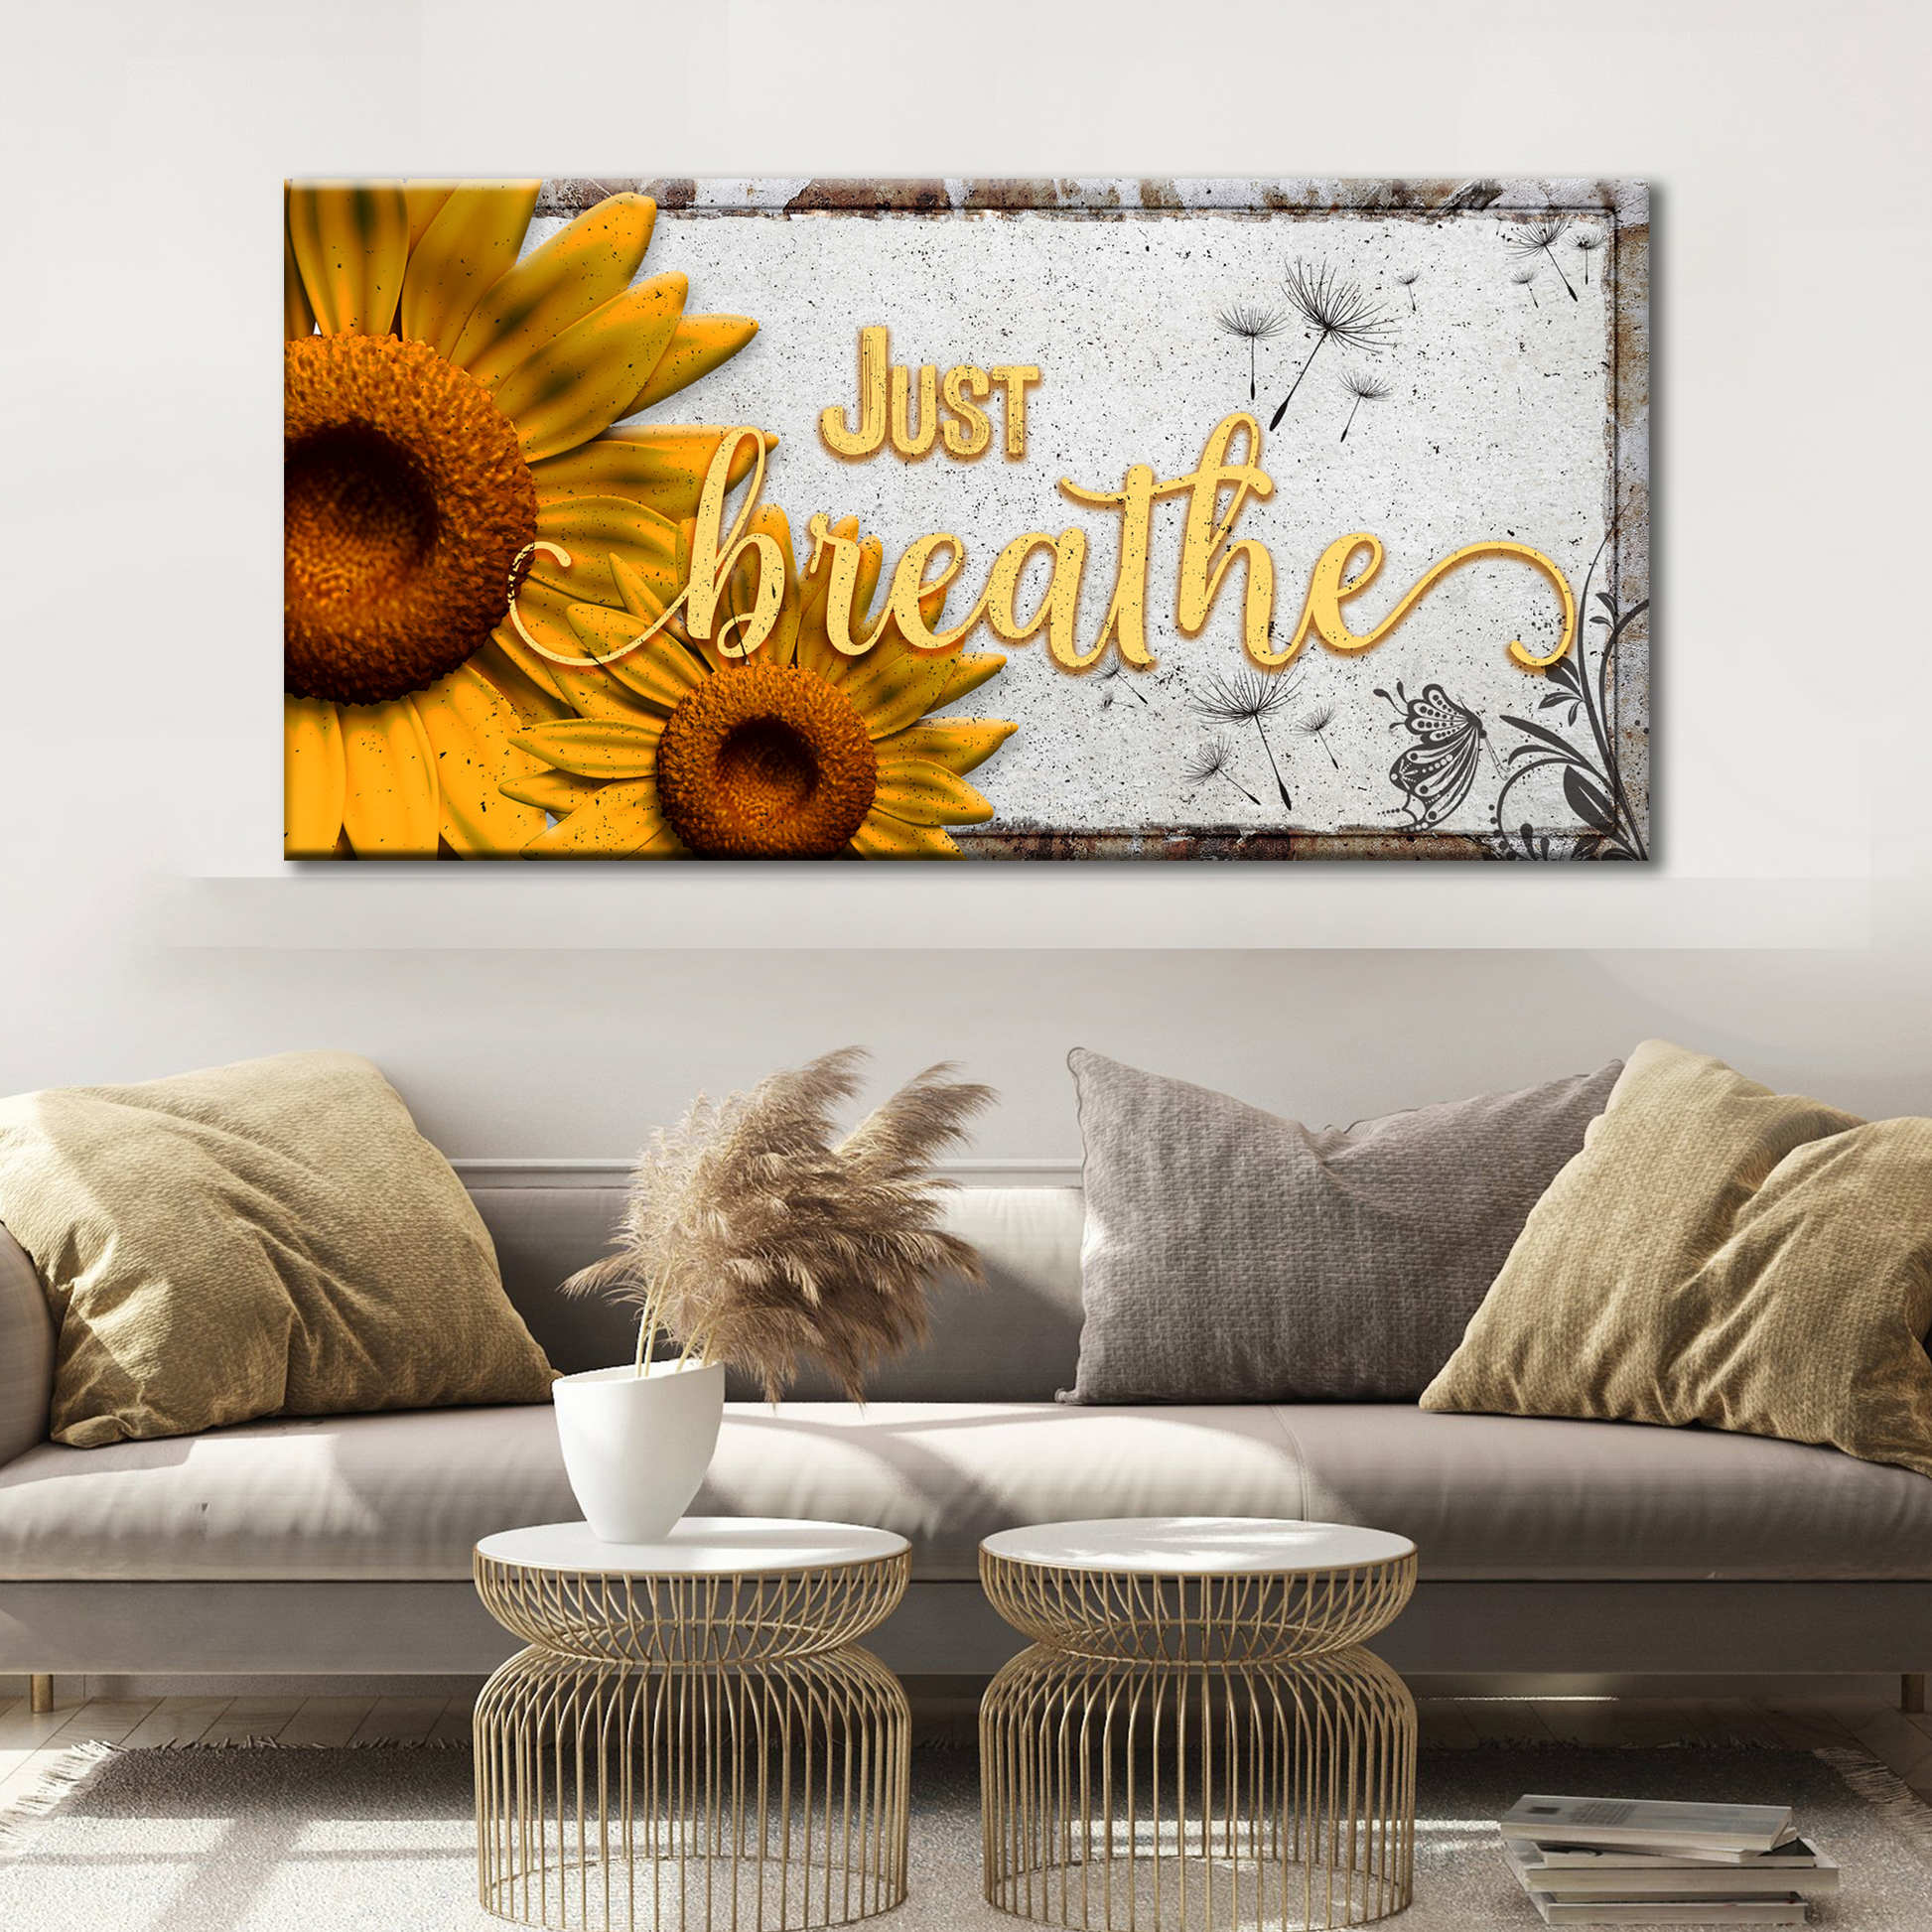 Just Breathe Sign - Image by Tailored Canvases